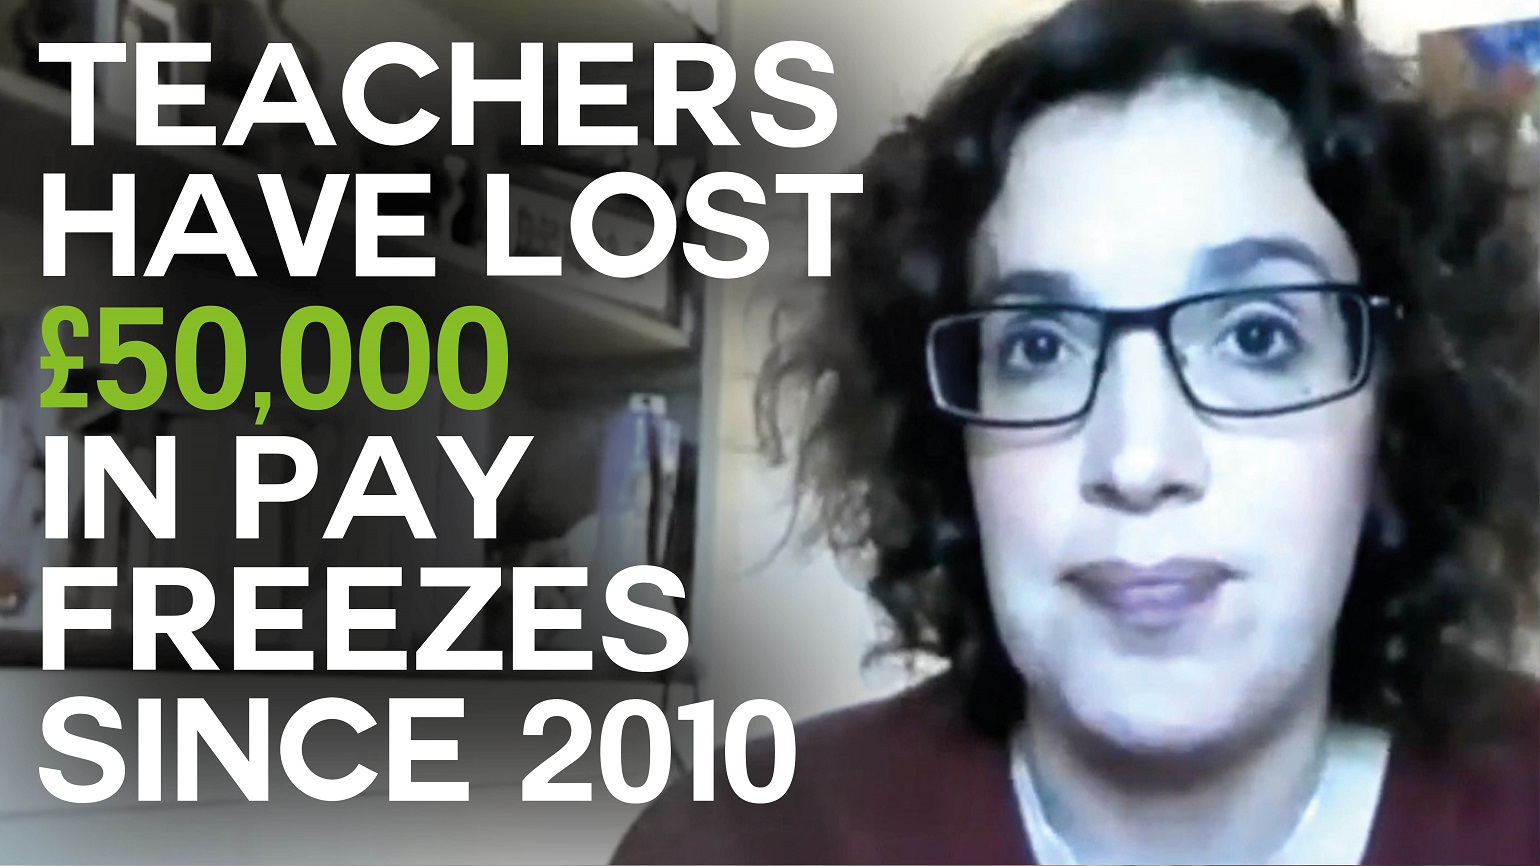 A still of Vix Lowthion in an interview with Bright Green. Text overlaid reads "Teachers have lost £50,000 in pay freezes since 2010"